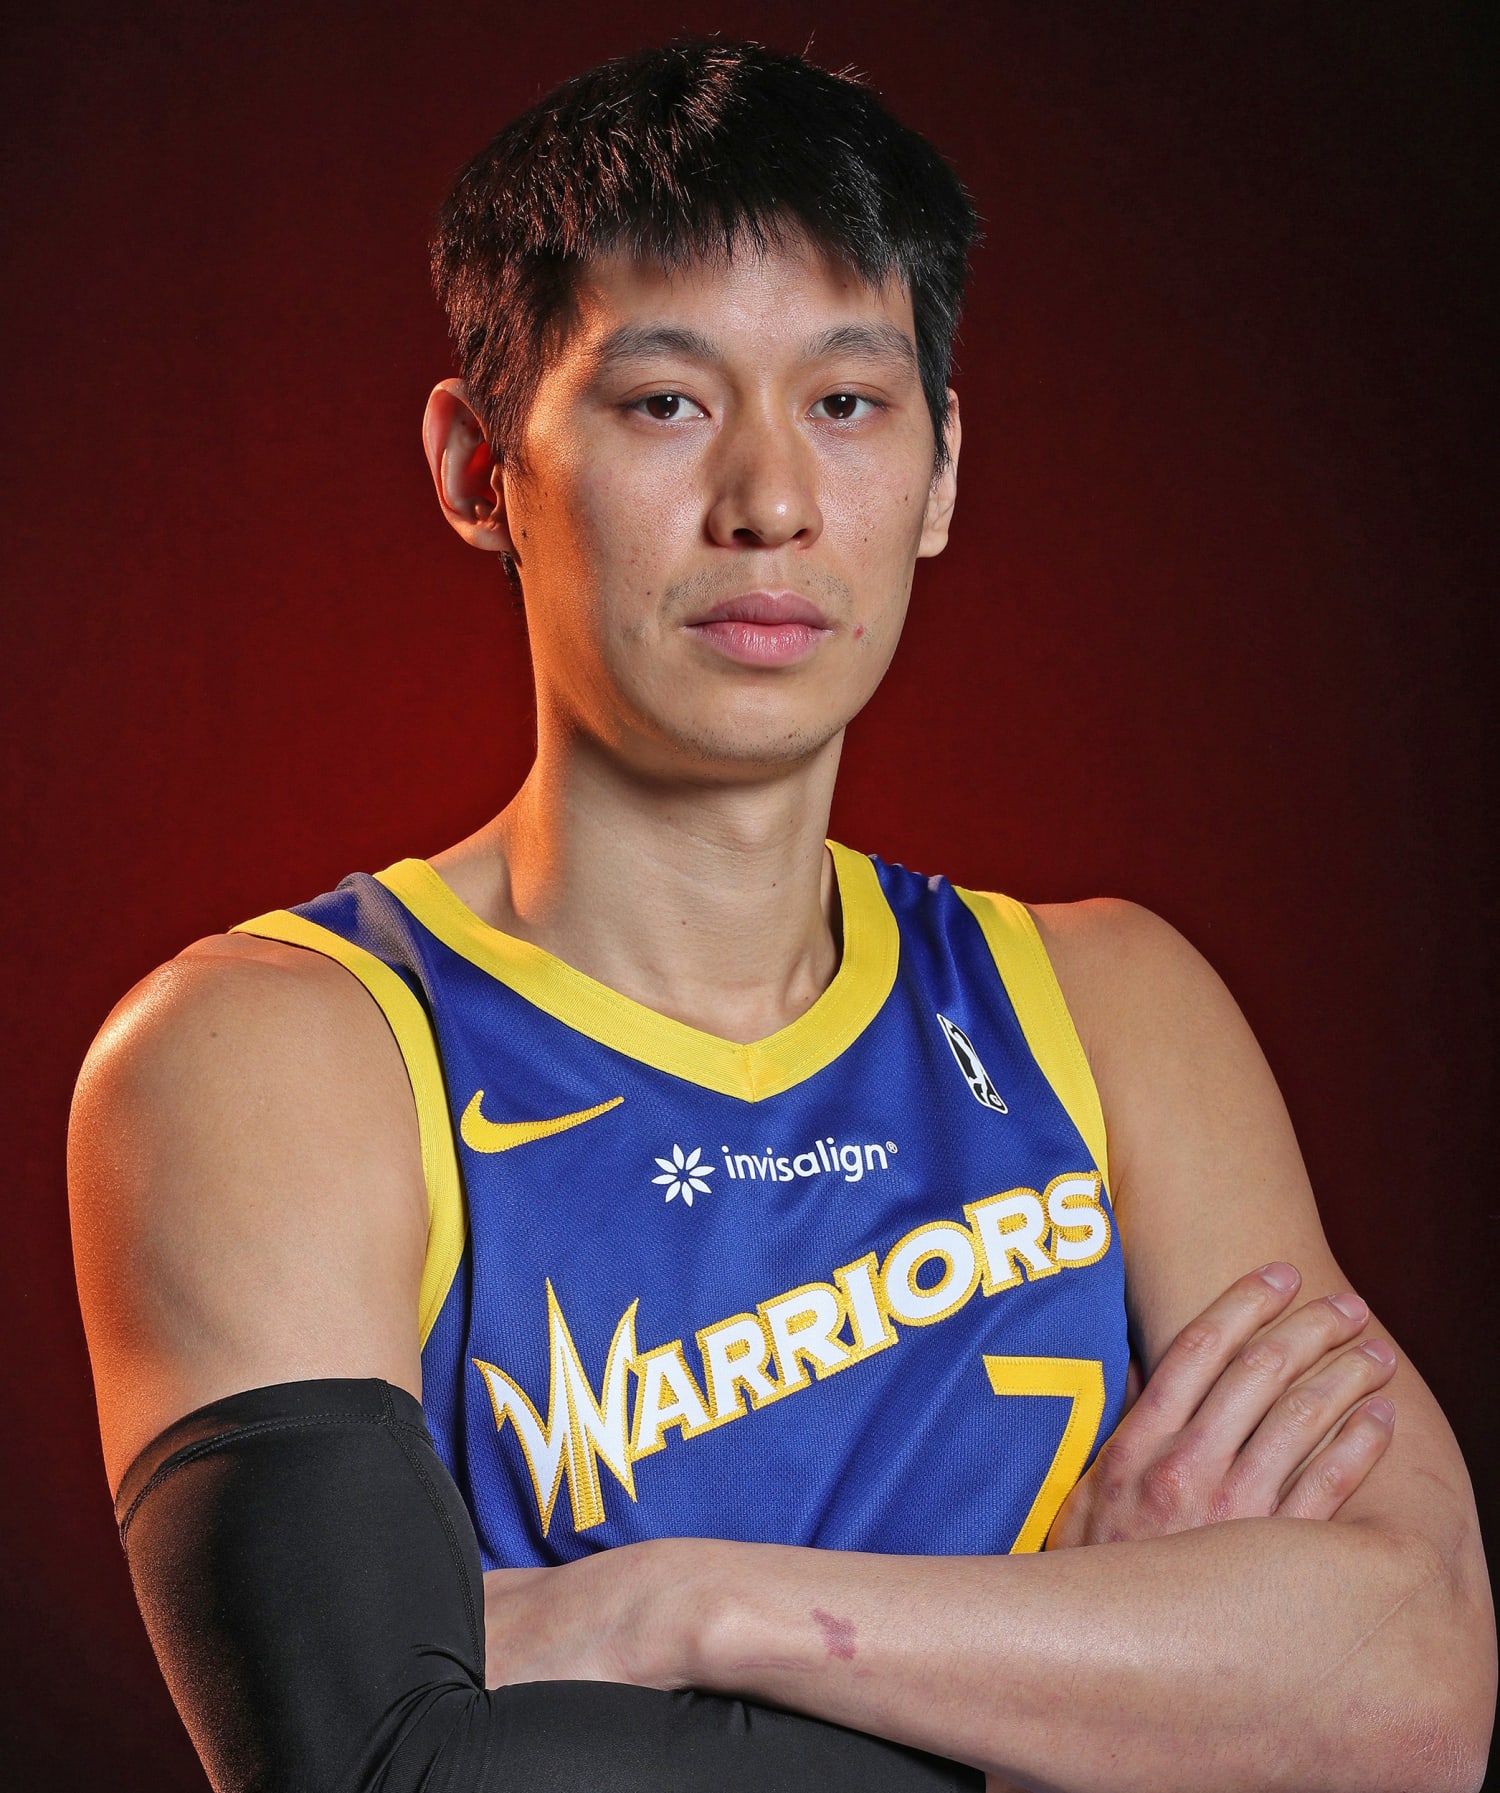 The perils of Linsanity: How effective will Jeremy Lin really be